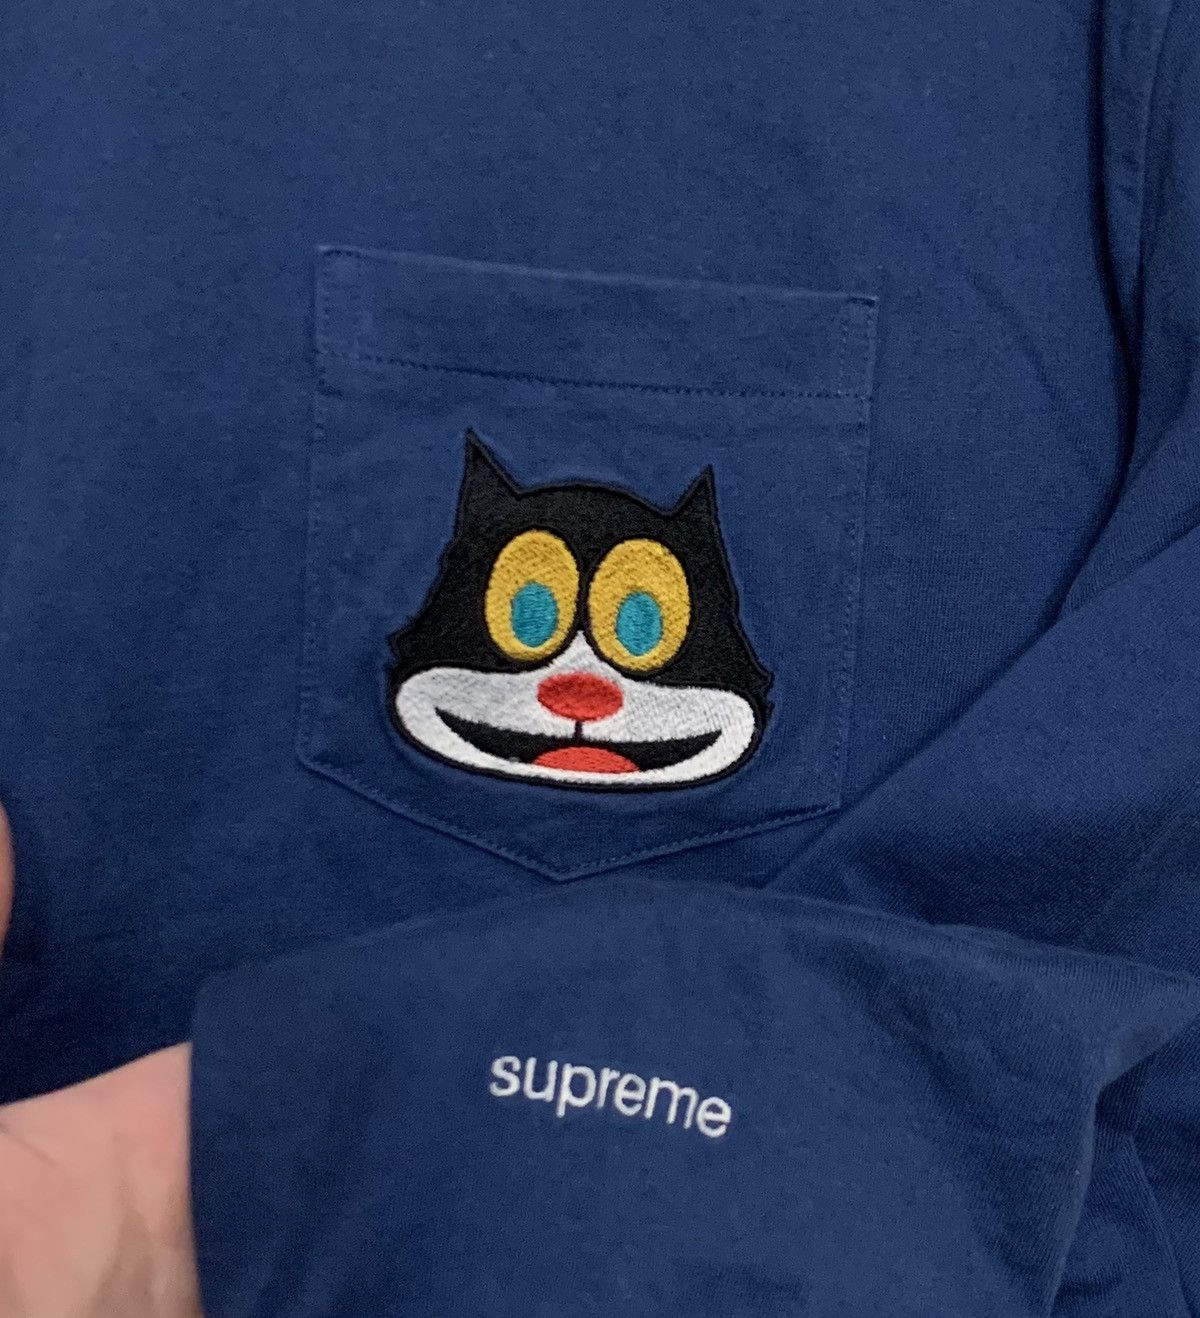 Supreme Supreme FW19 embroidered cat long sleeve t-shirt | Grailed